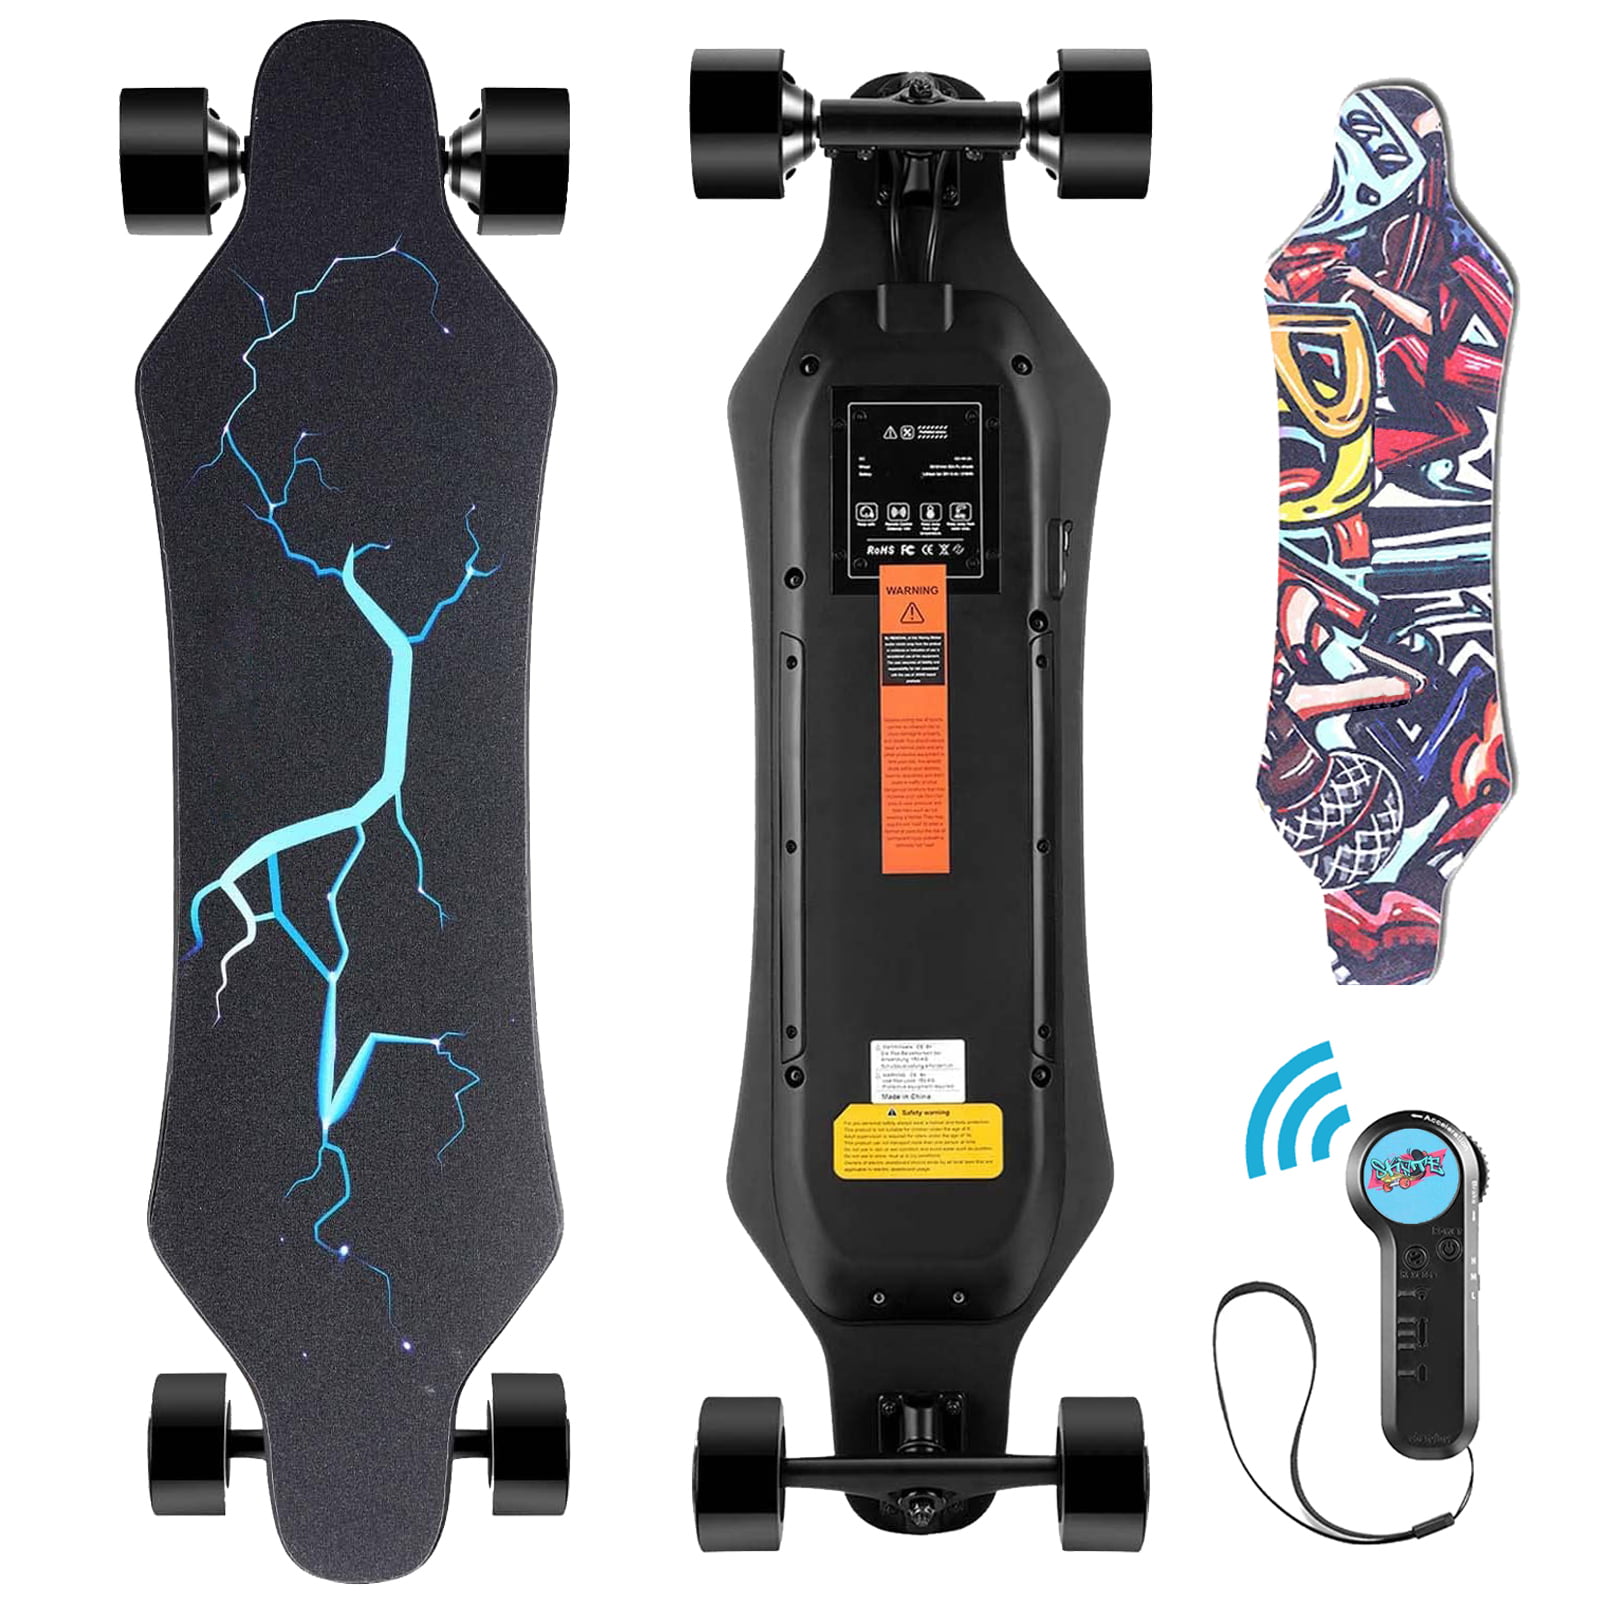 900W All Electric Skateboard with Remote for Adults, 3 Speeds Adjustable 8 Layers E-Skateboard Longboard for Advanced Skaters - Walmart.com